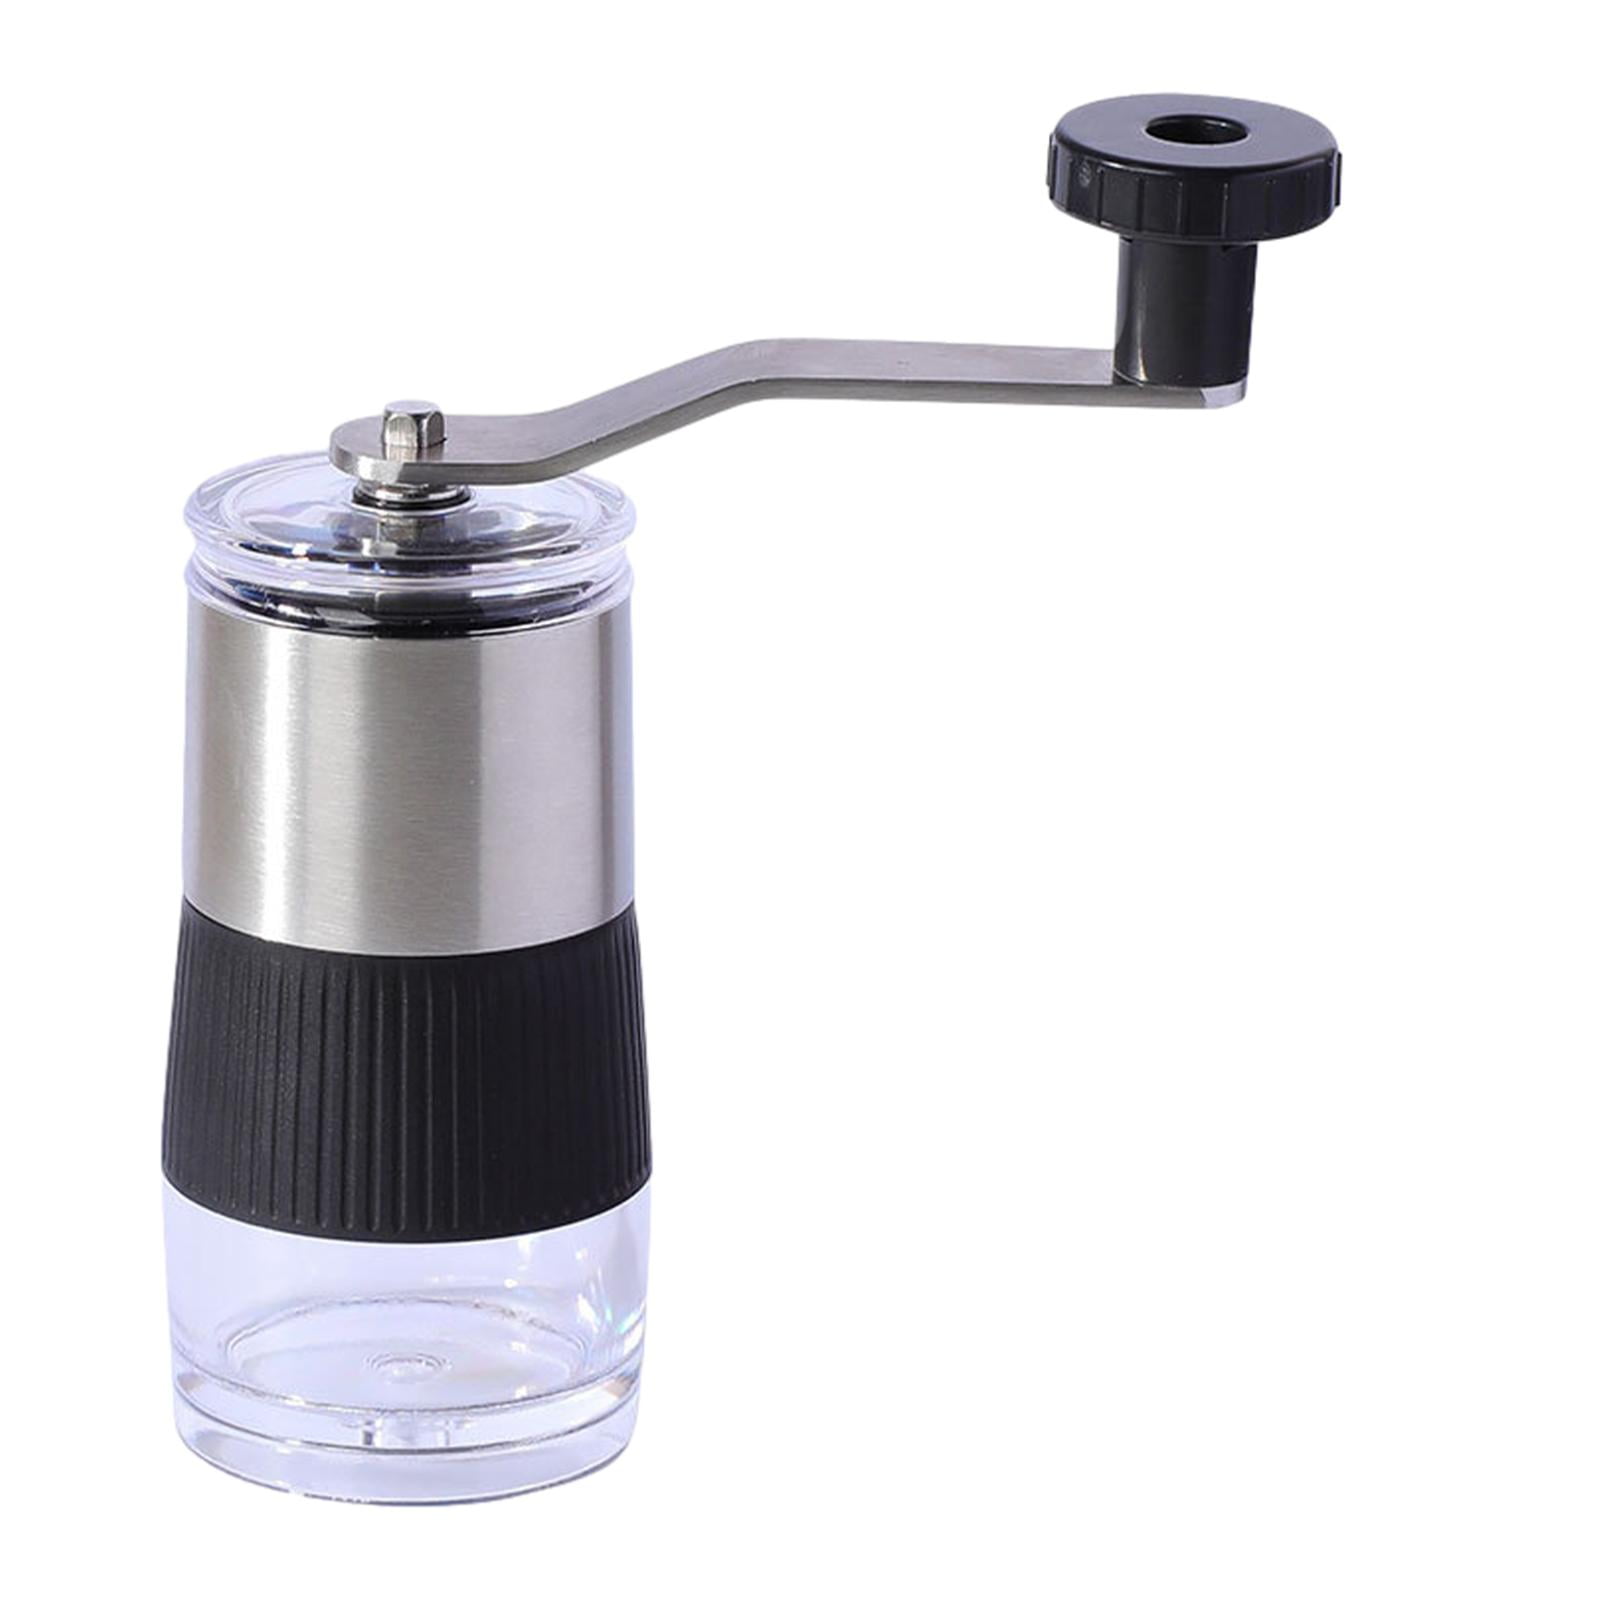 Small Manual Coffee Grinder Hand Crank Coffee Mill for Kitchen